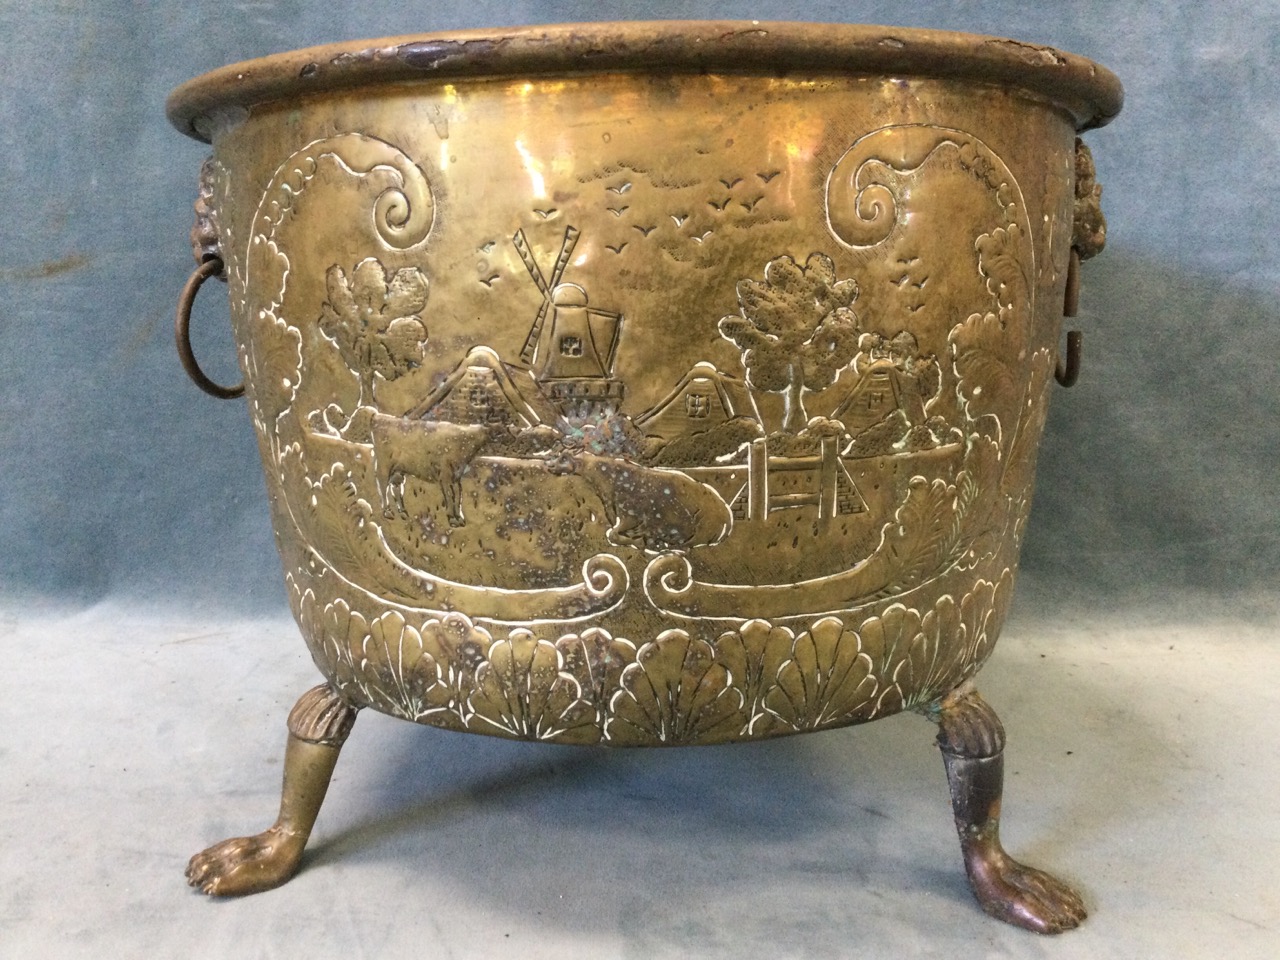 A nineteenth century embossed brass log bin raised on paw feet, the sides with lionmask ring handles - Image 2 of 3